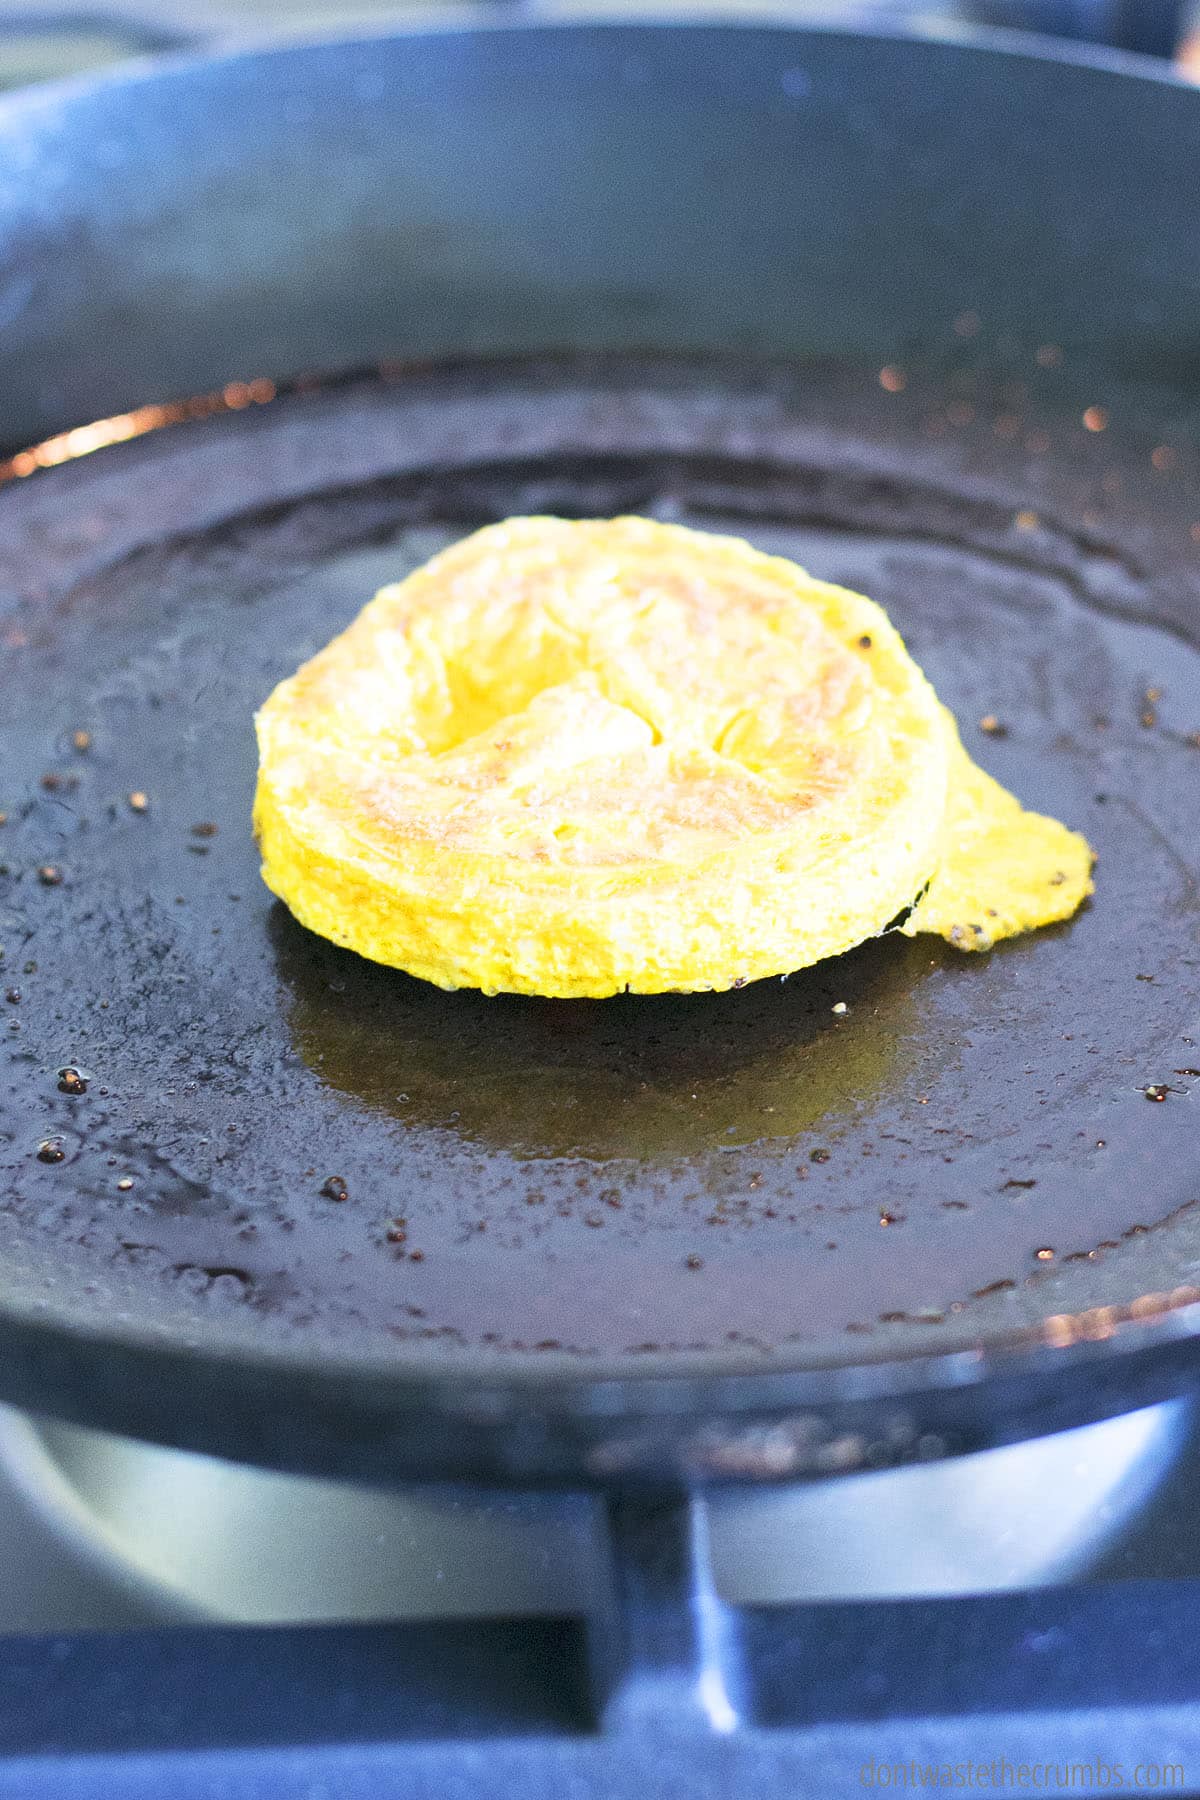 Cooked egg in a circle shape on a skillet.